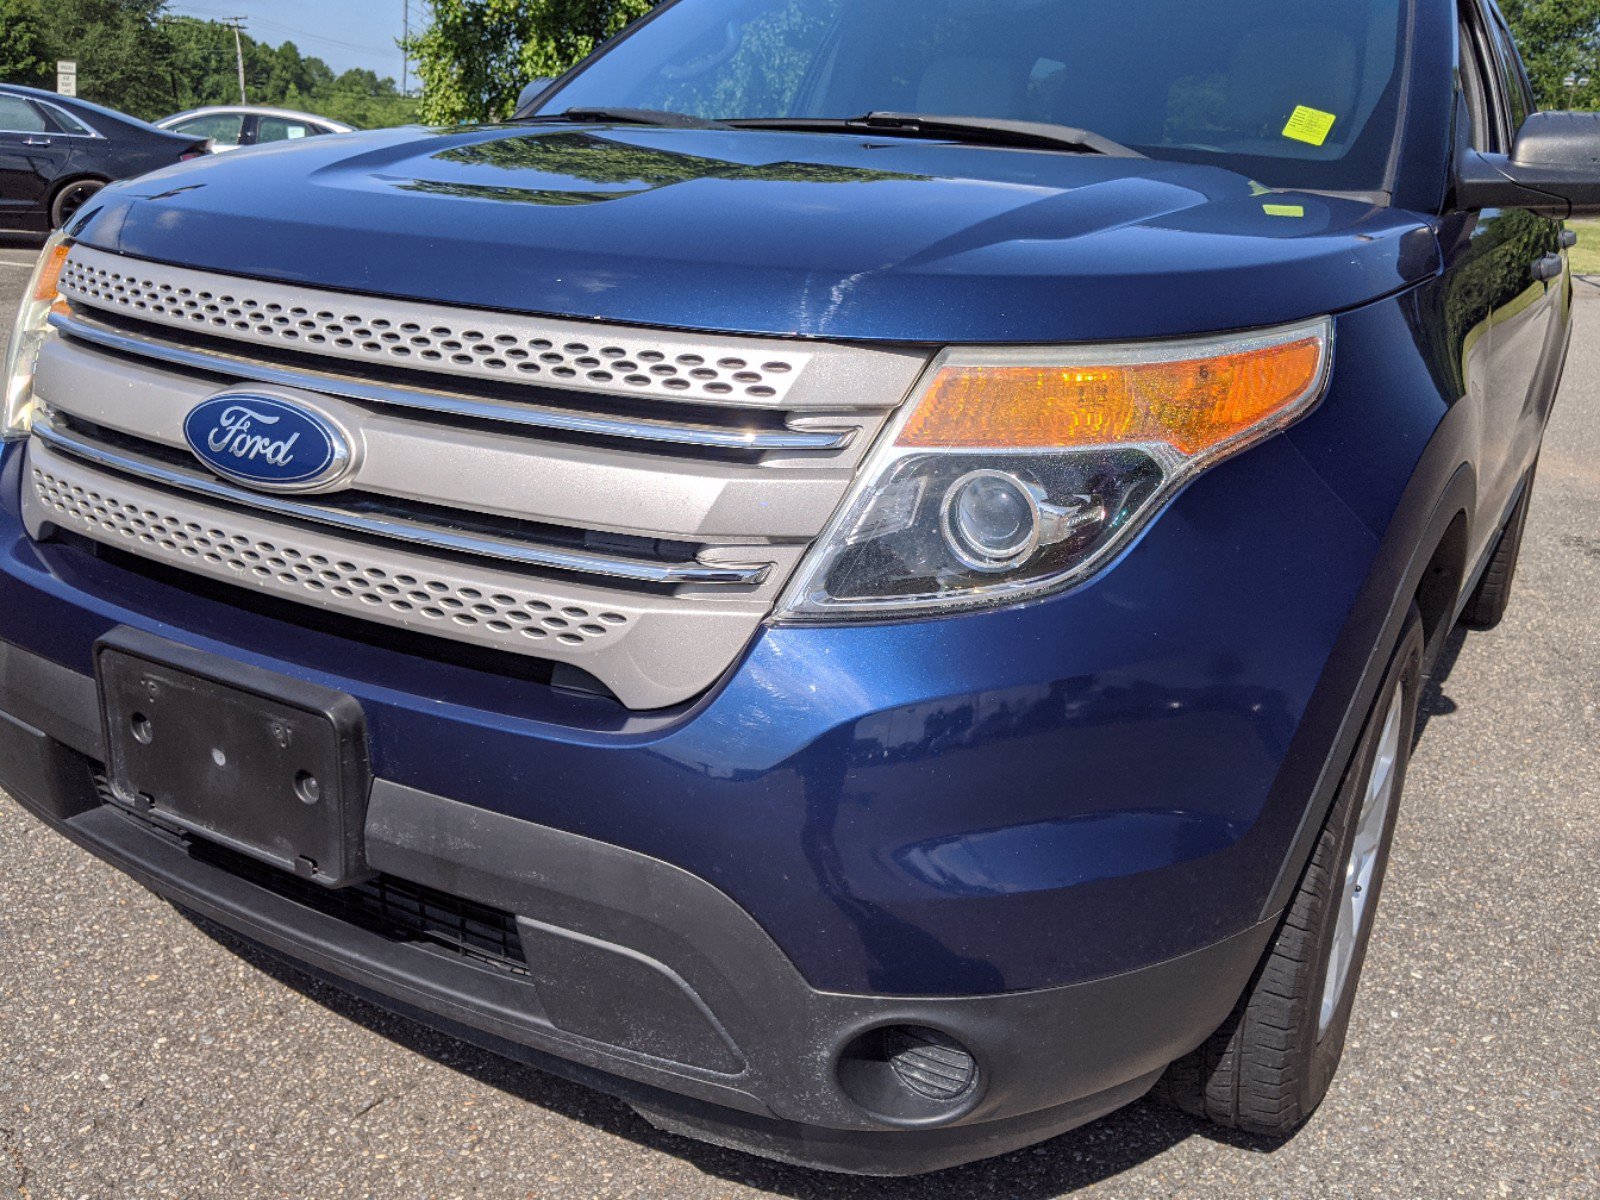 PreOwned 2012 Ford Explorer Base 4WD